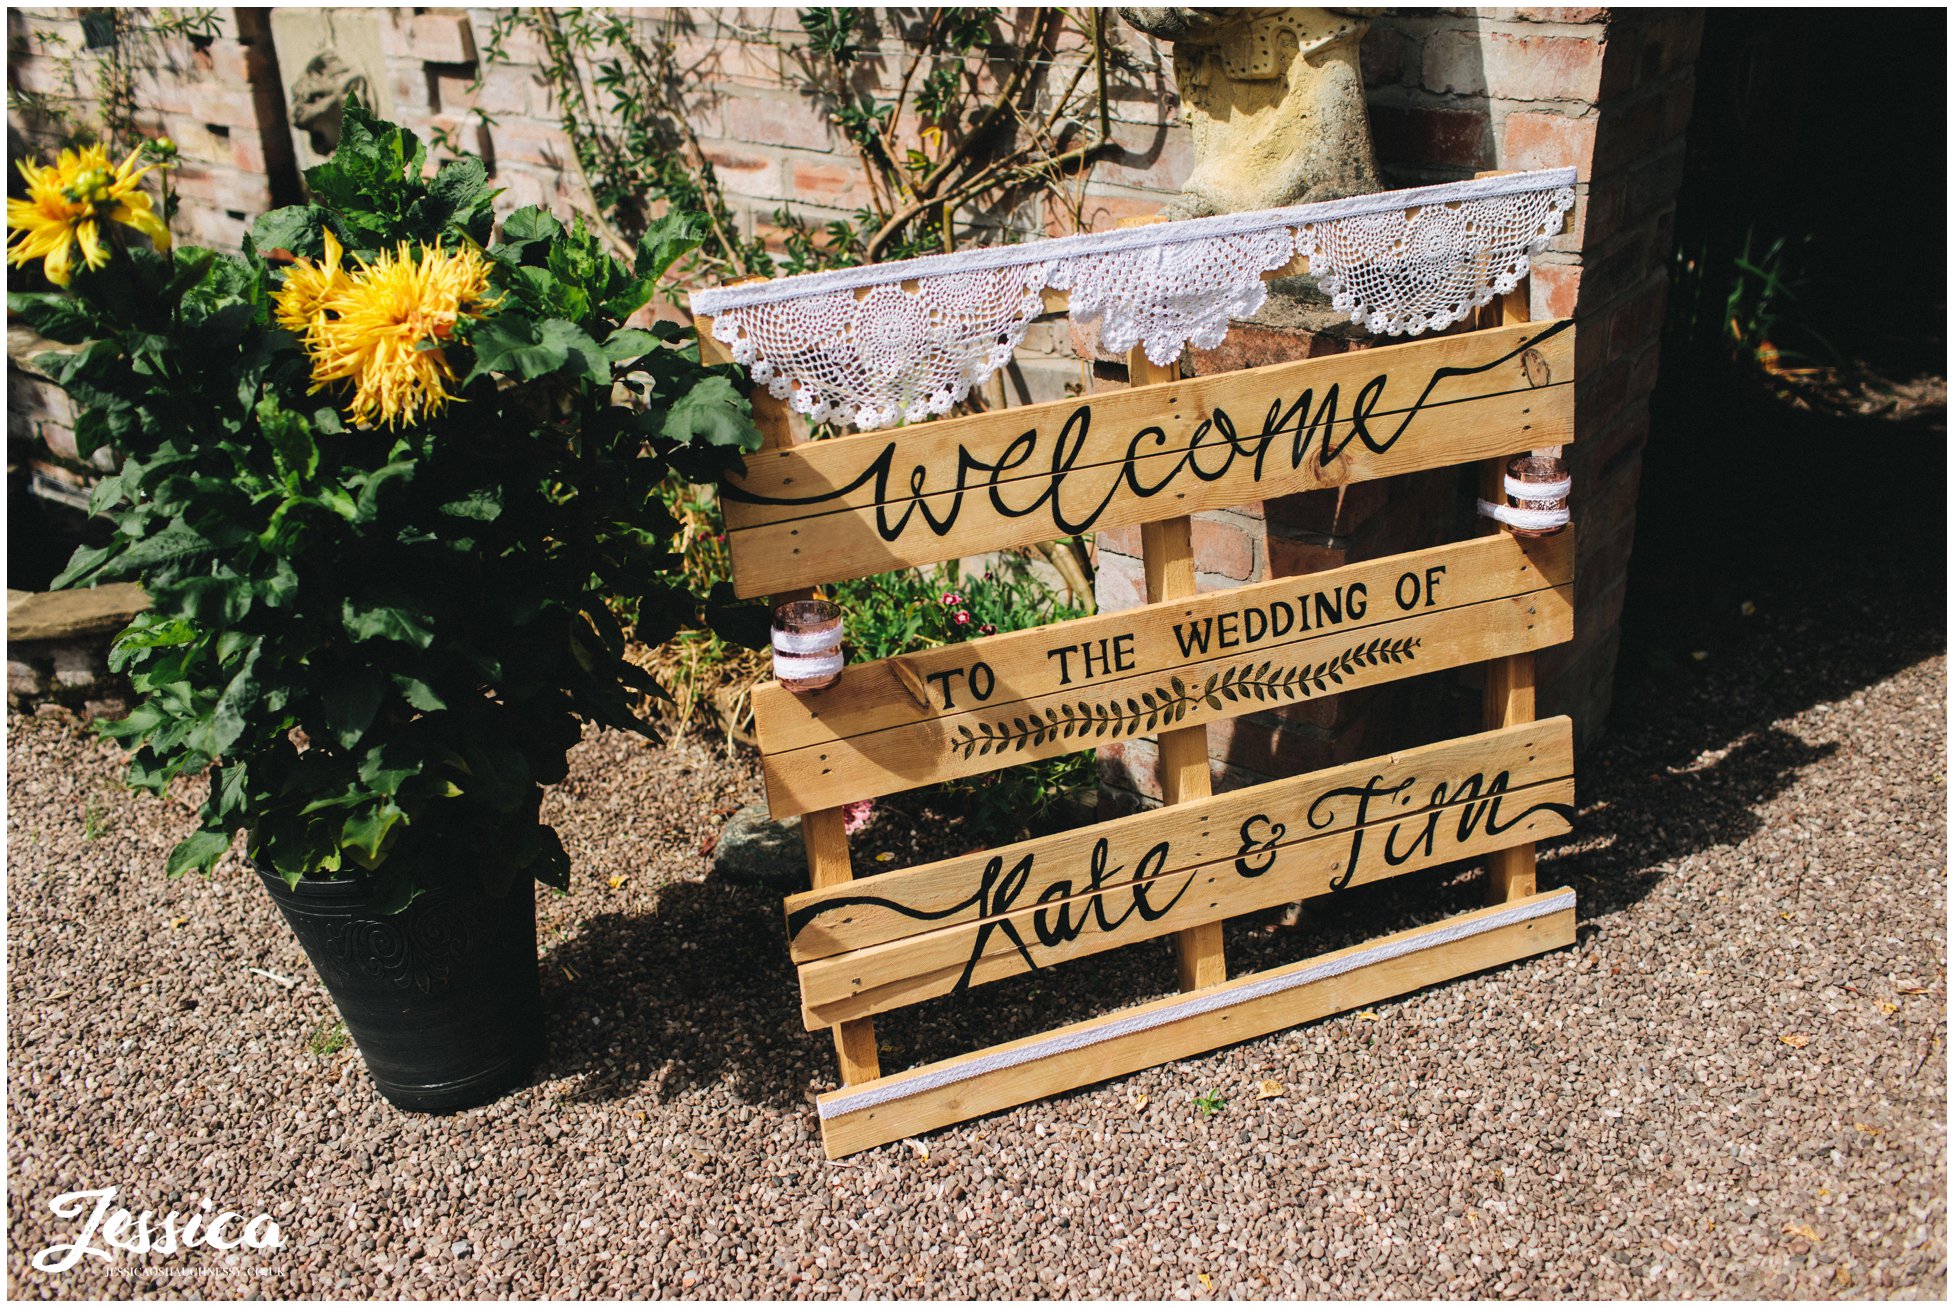 hand painted wooden pallets welcome the guests into the ceremony